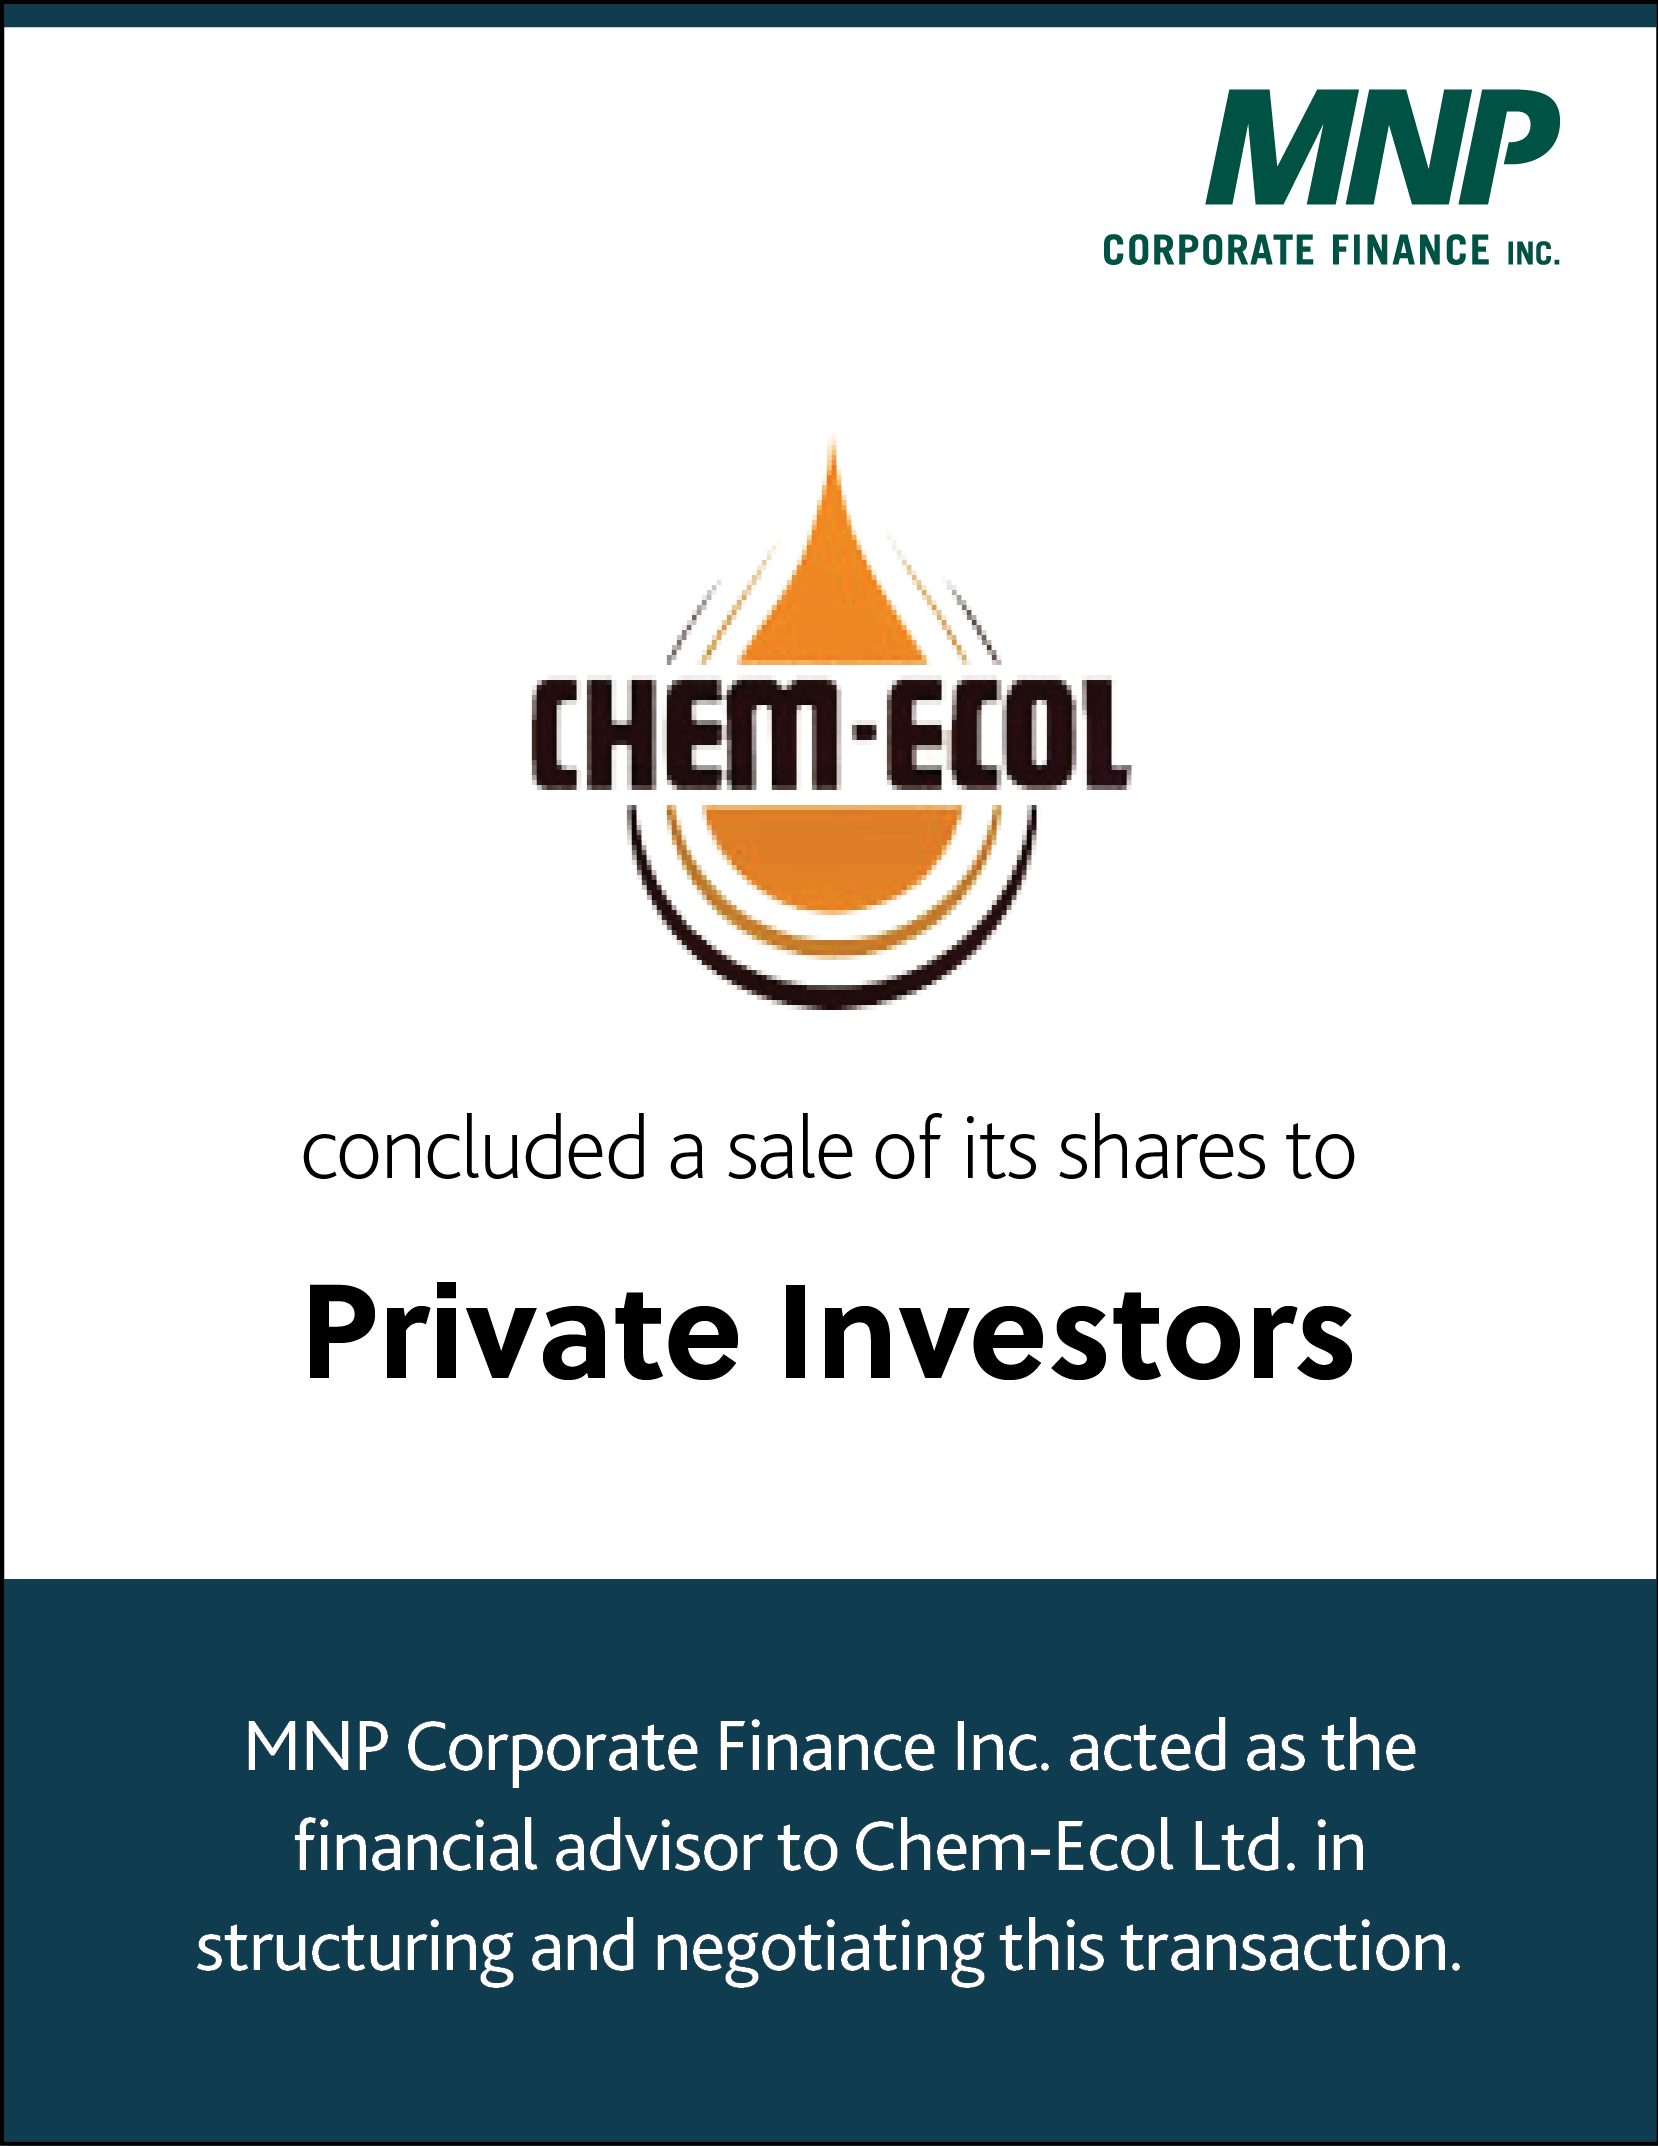 Chem-Ecol concluded a sale of its shares to private investors